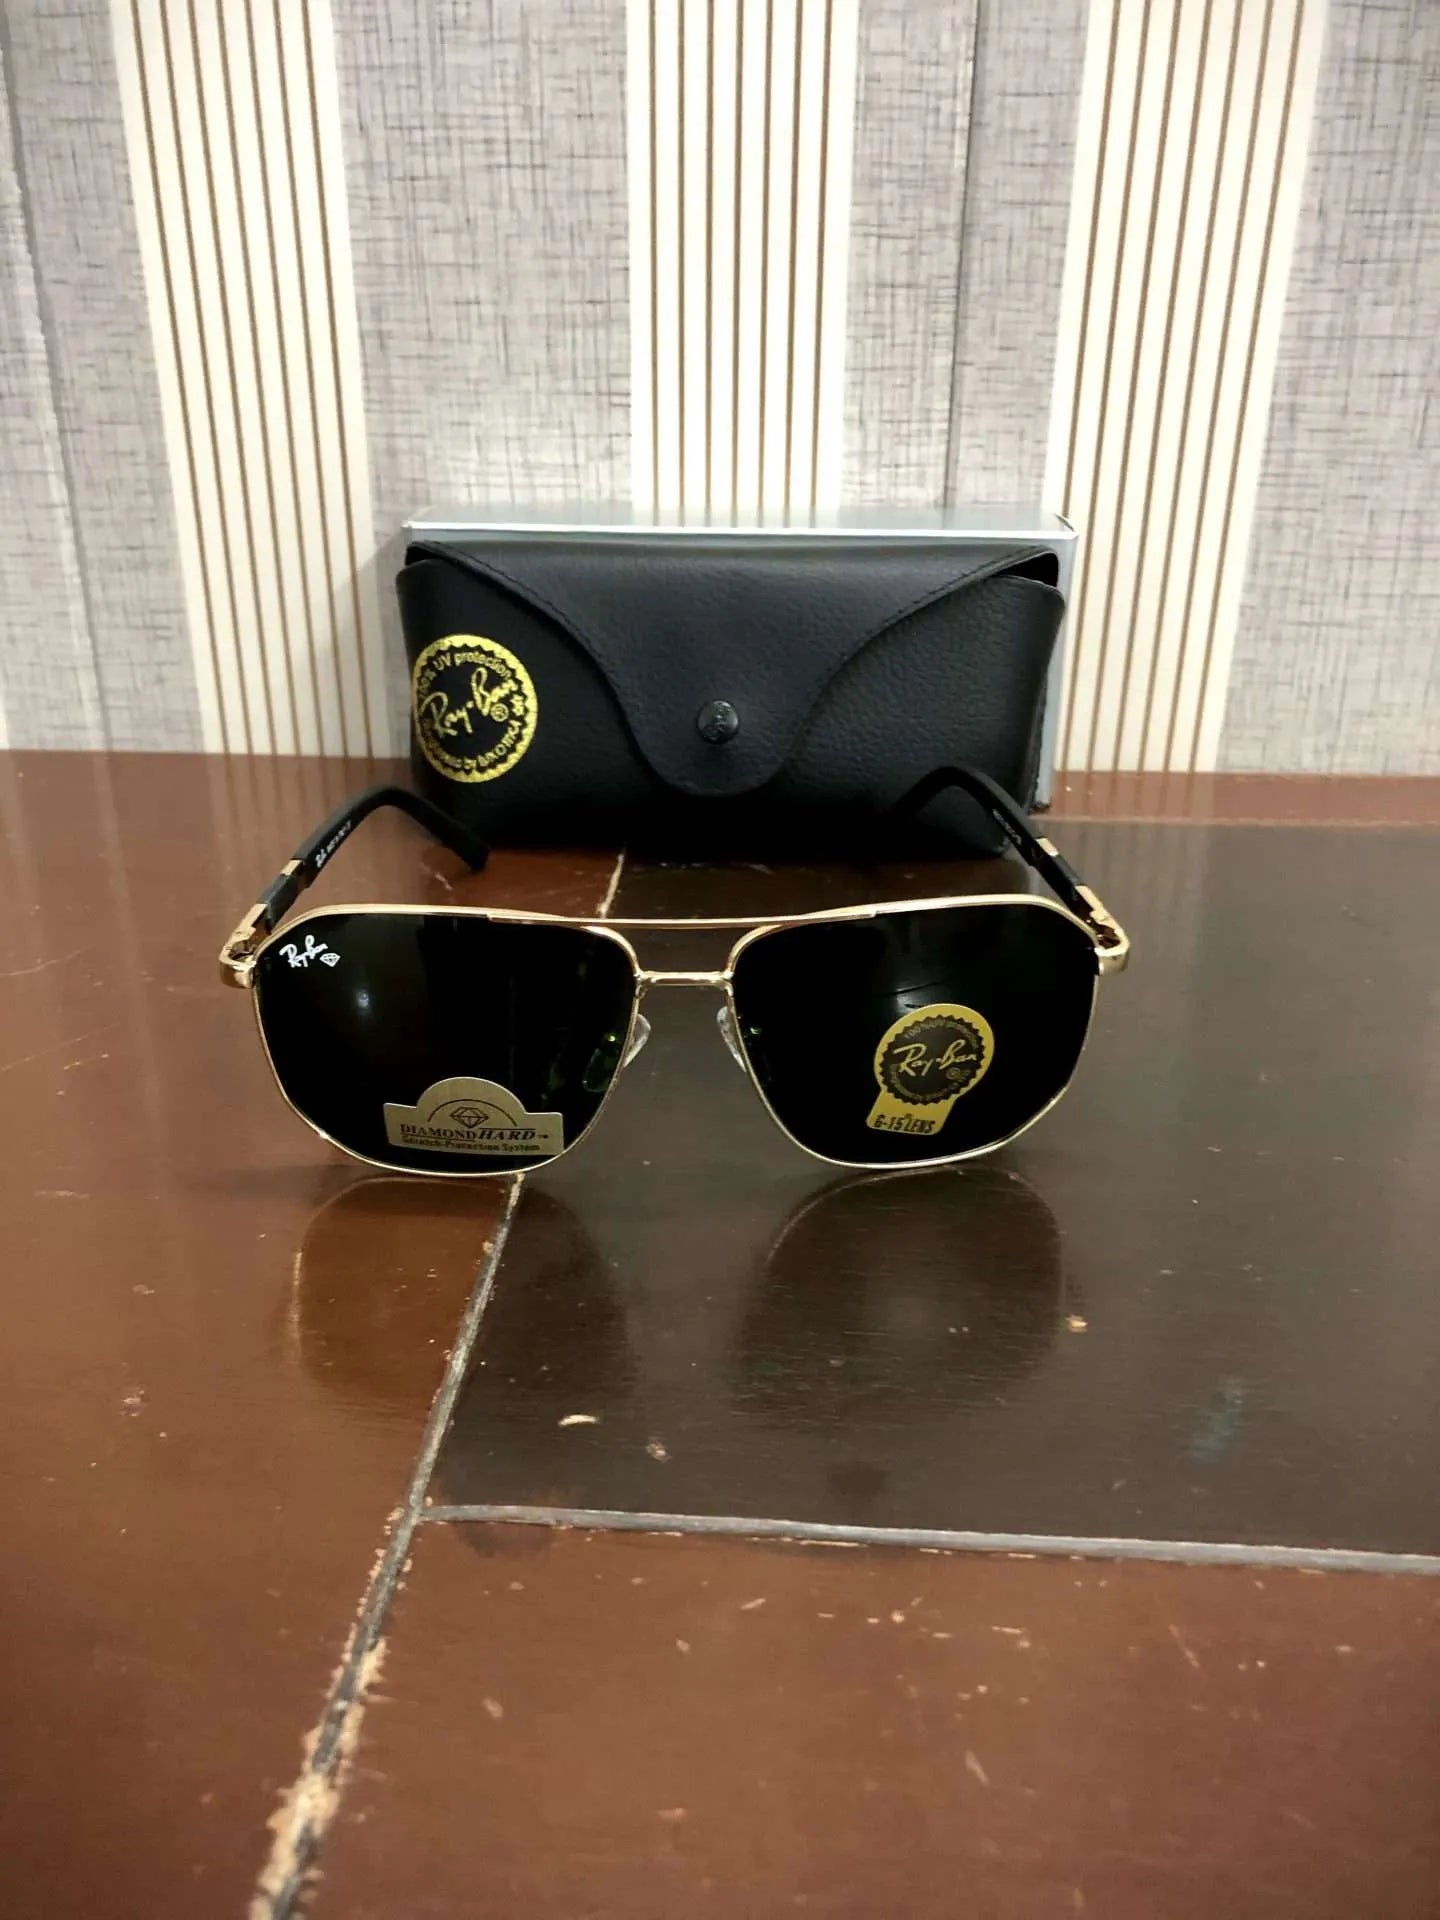 100% Original Ray-Ban Square Sunglasses: Scratch-Resistant G15 Lens, Made in Italy